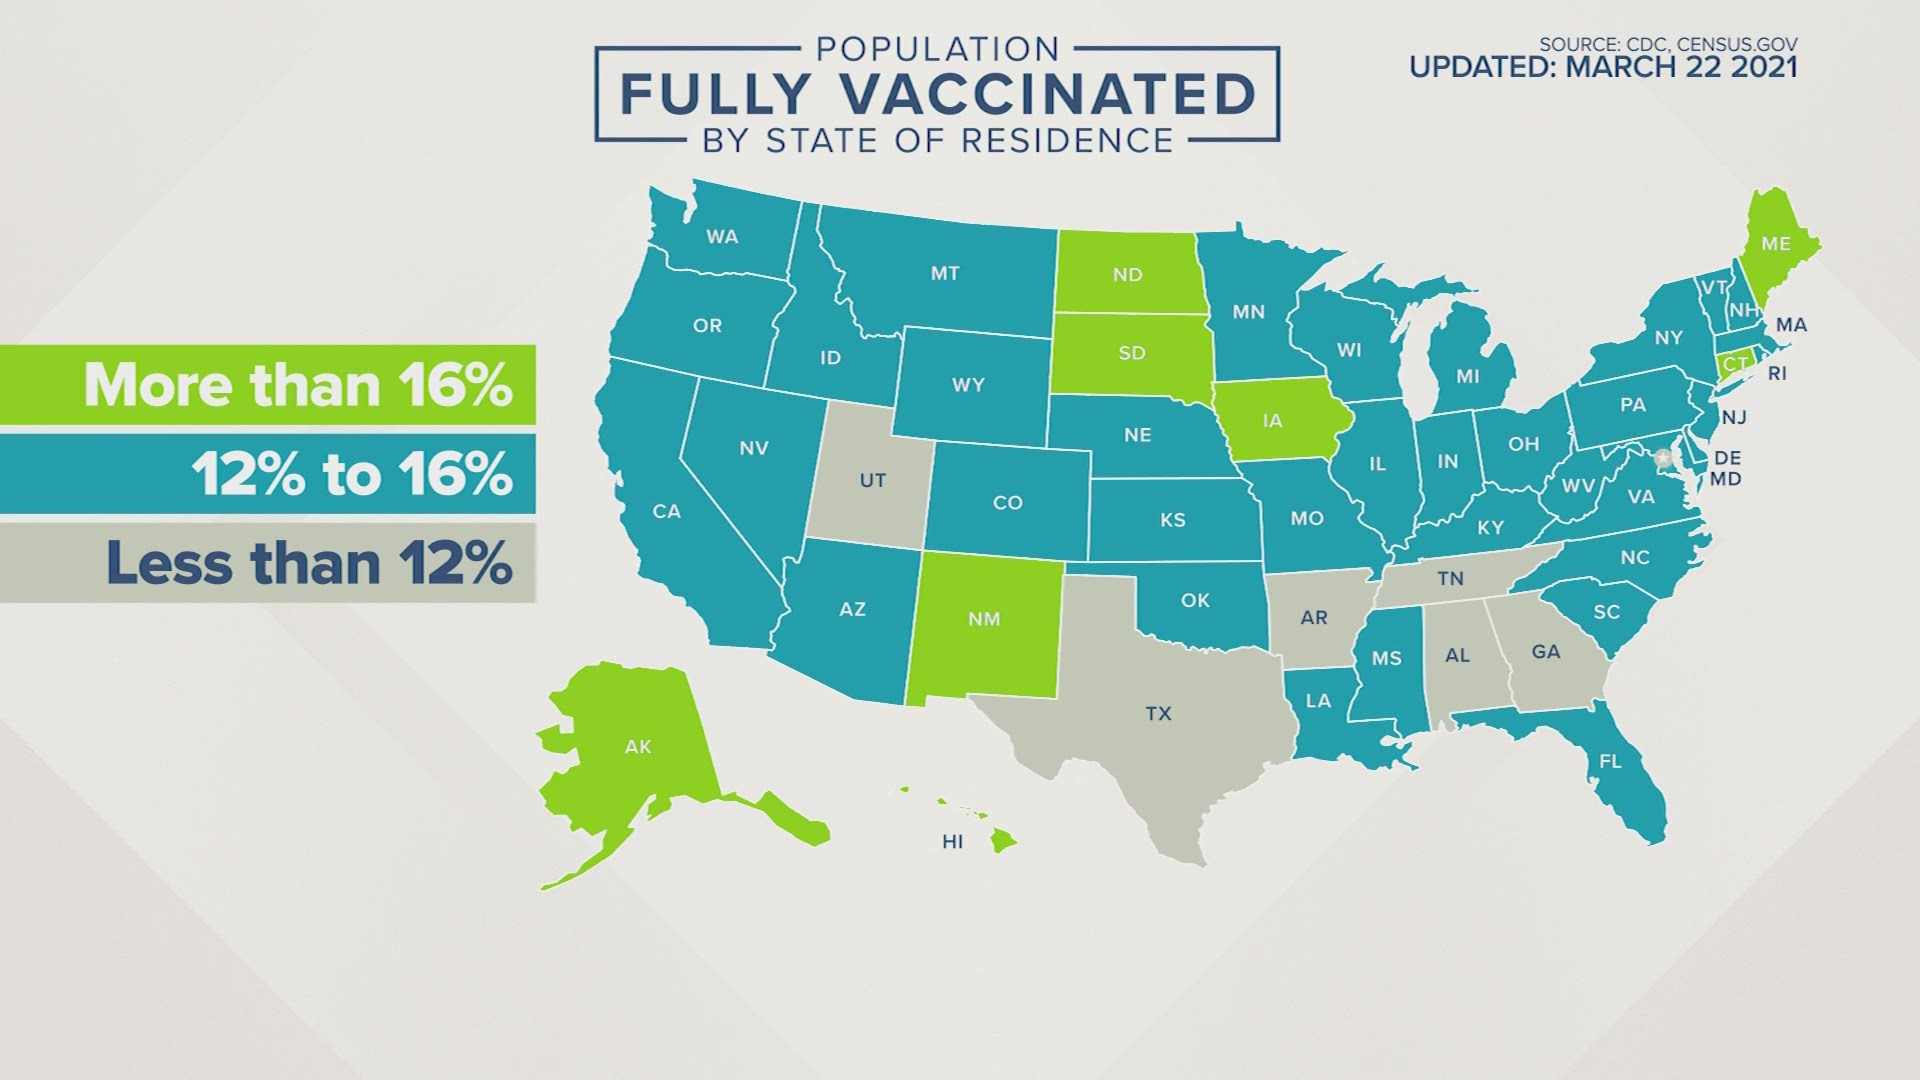 The data shows Texas ranks 45 out of 50 states for fully vaccinated people.